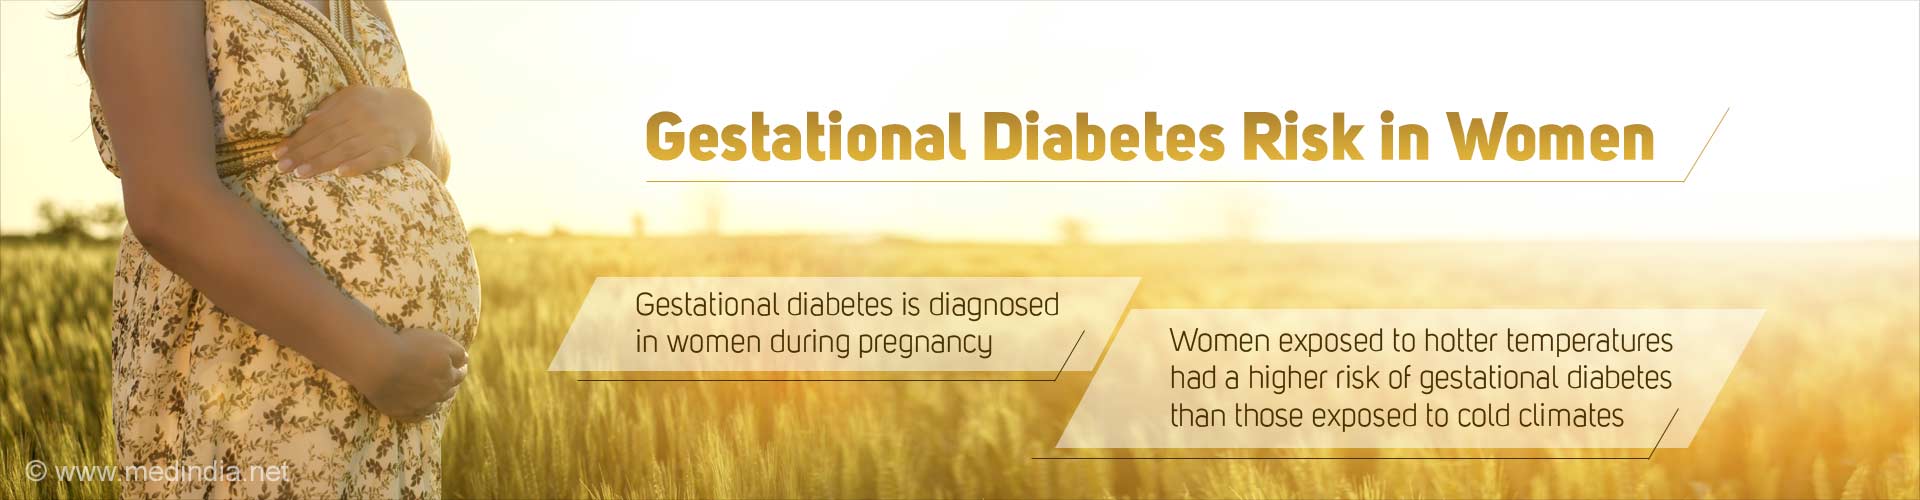 Gestational diabetes risk in women
- Gestational diabetes is diagnosed in women during pregnancy
- Women exposed to hotter temperatures had a higher risk of gestational diabetes than those exposed to cold climates